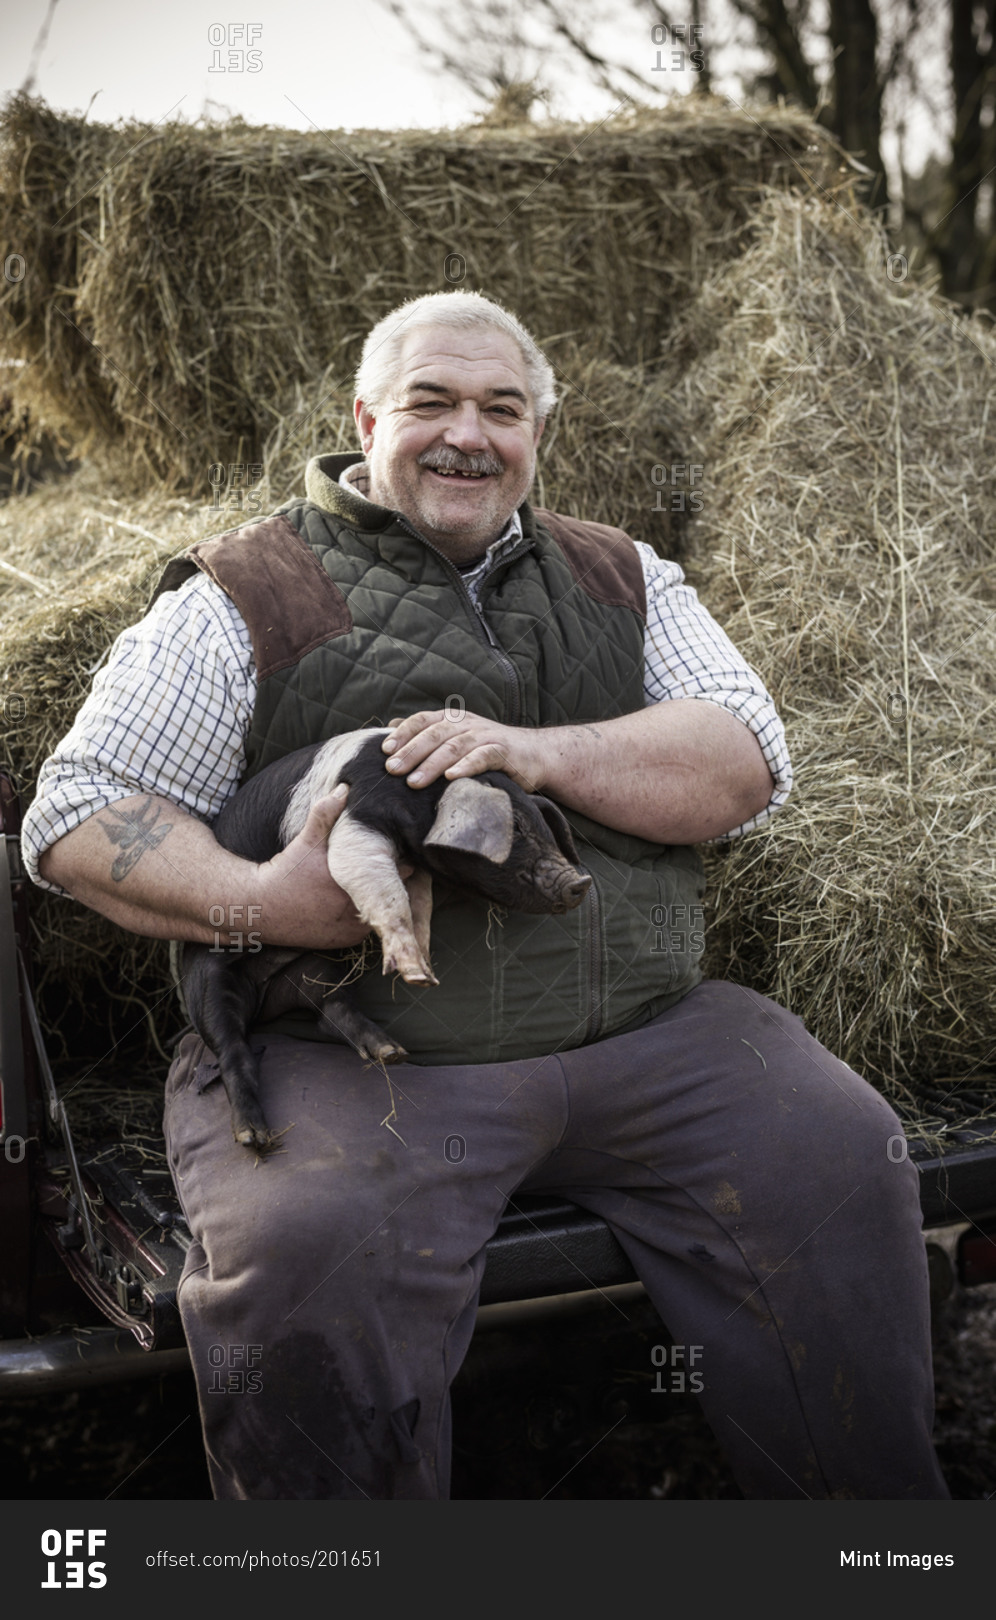 A large man, farmer in a waistcoat and working clothes, holding a piglet and smiling